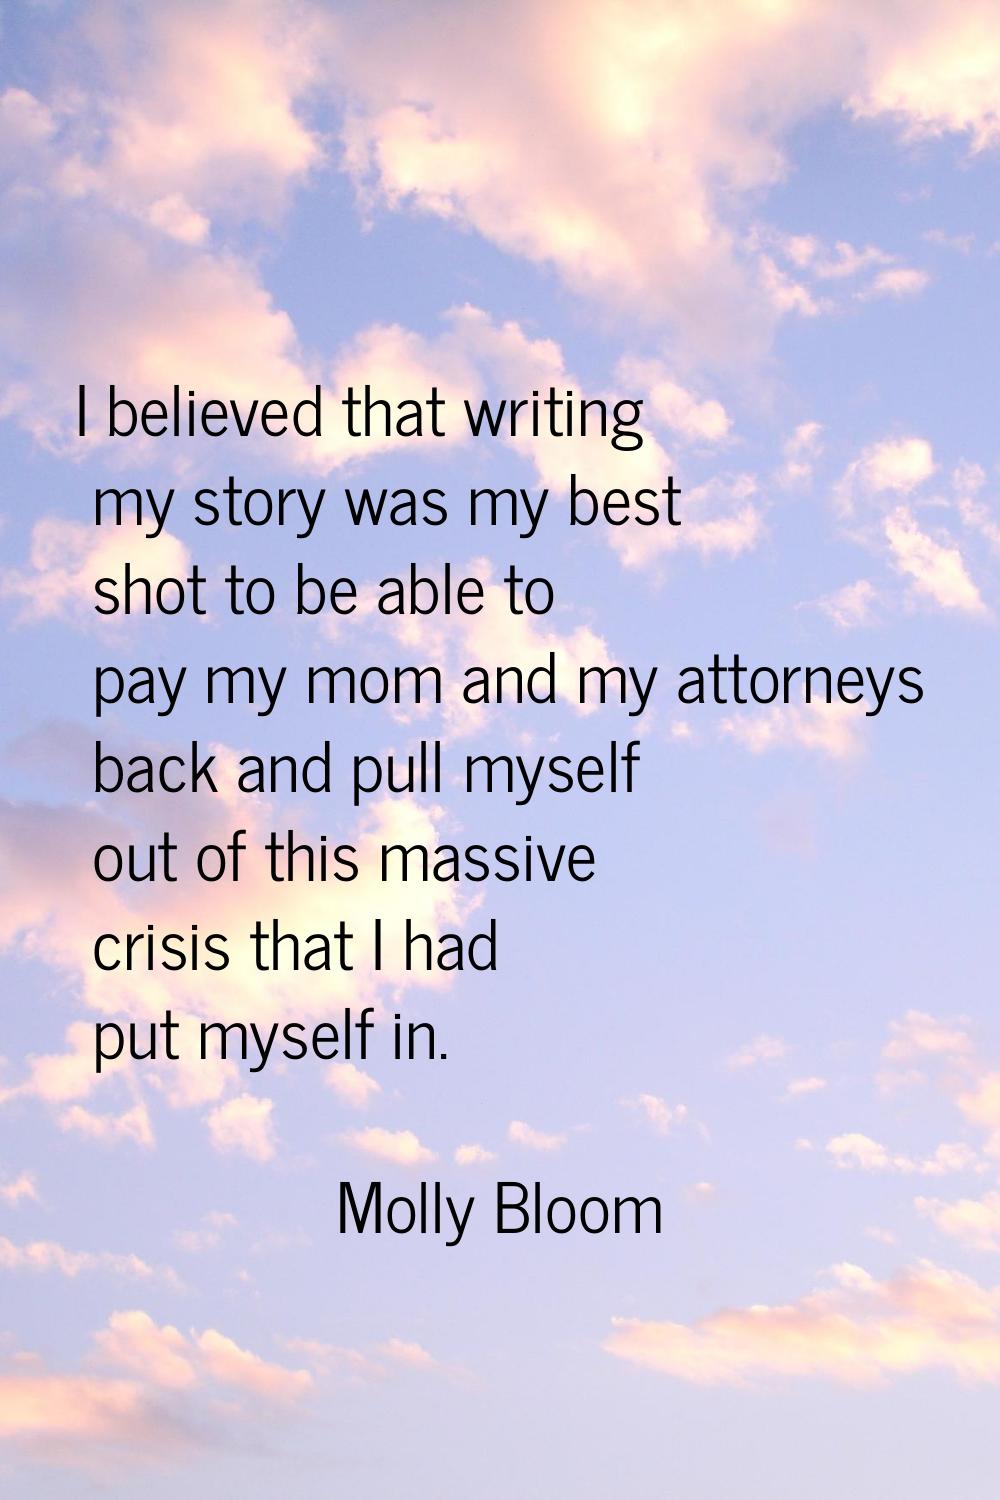 I believed that writing my story was my best shot to be able to pay my mom and my attorneys back an